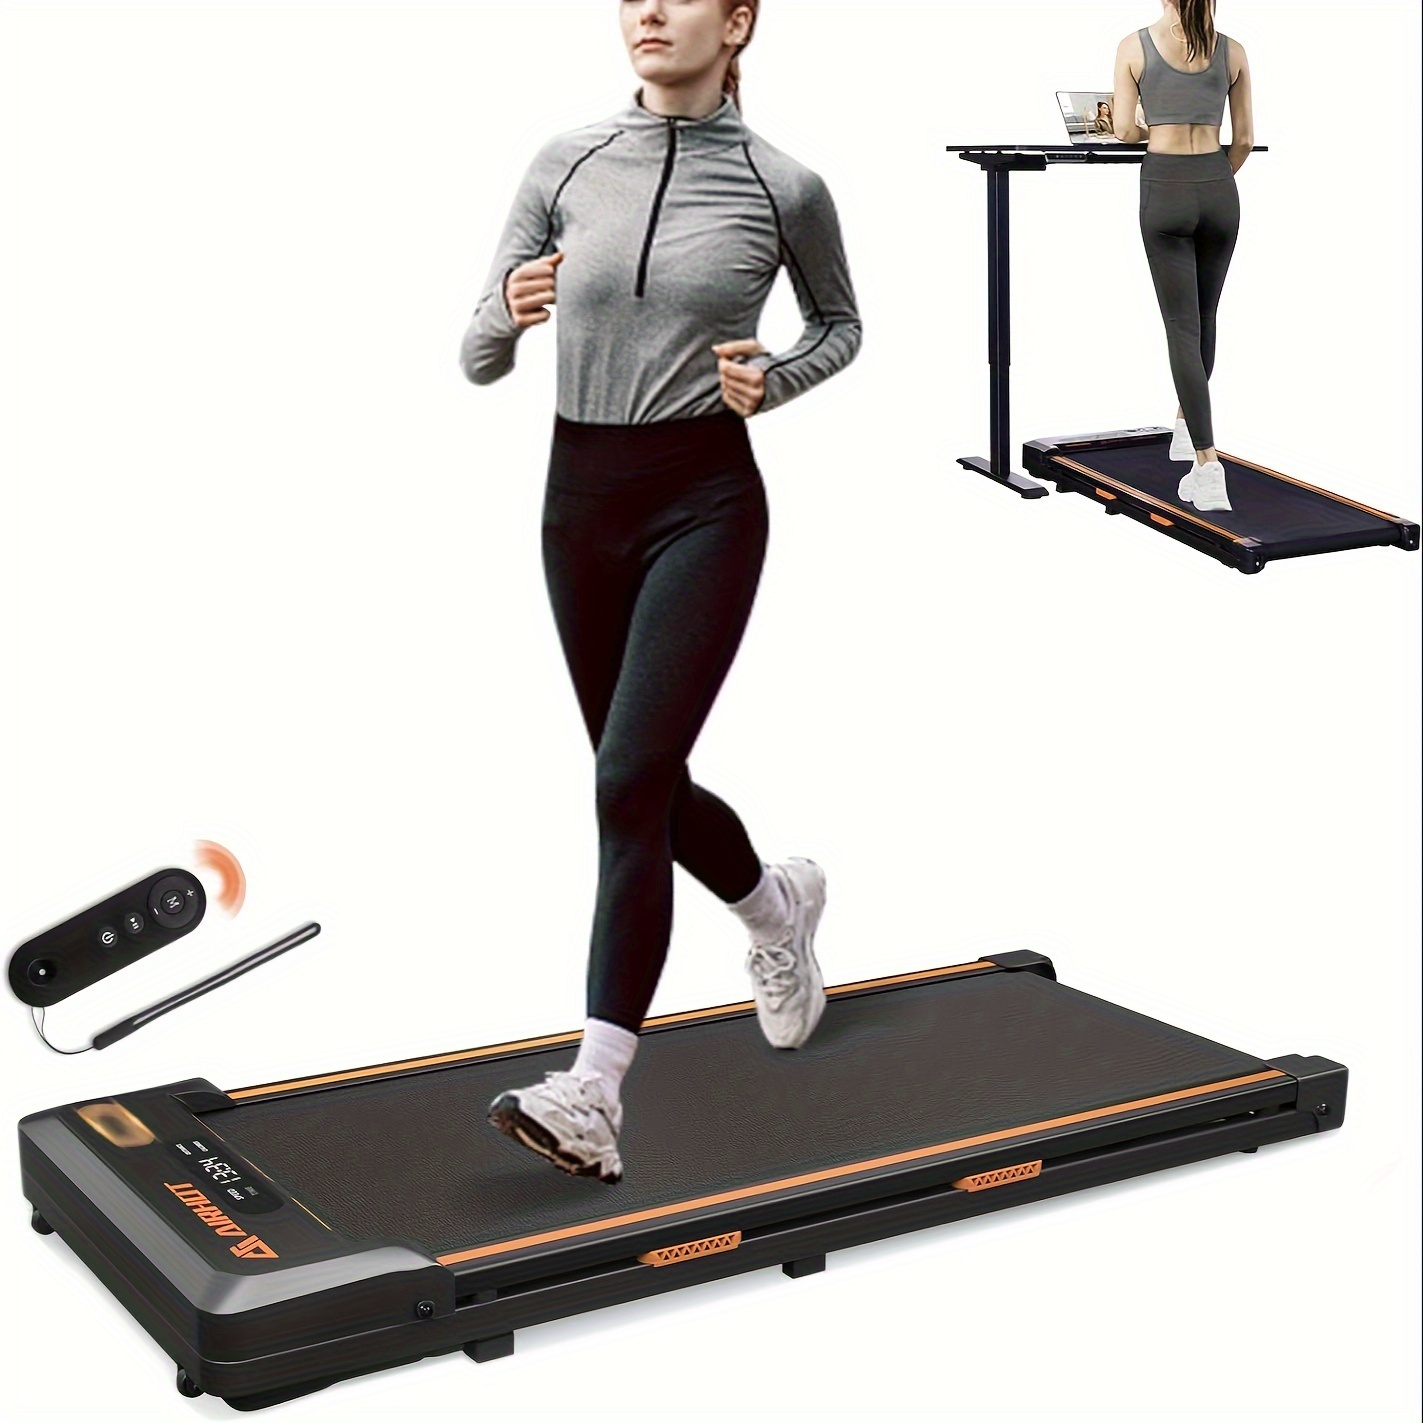 

Kerdomunder Desk Treadmill, 2 In 1 Walking And Jogging Pad, Portable Walking Treadmill With Remote Control Lanyard For Home/office, 2.5hp Low-noise Desk Treadmill With Led Display